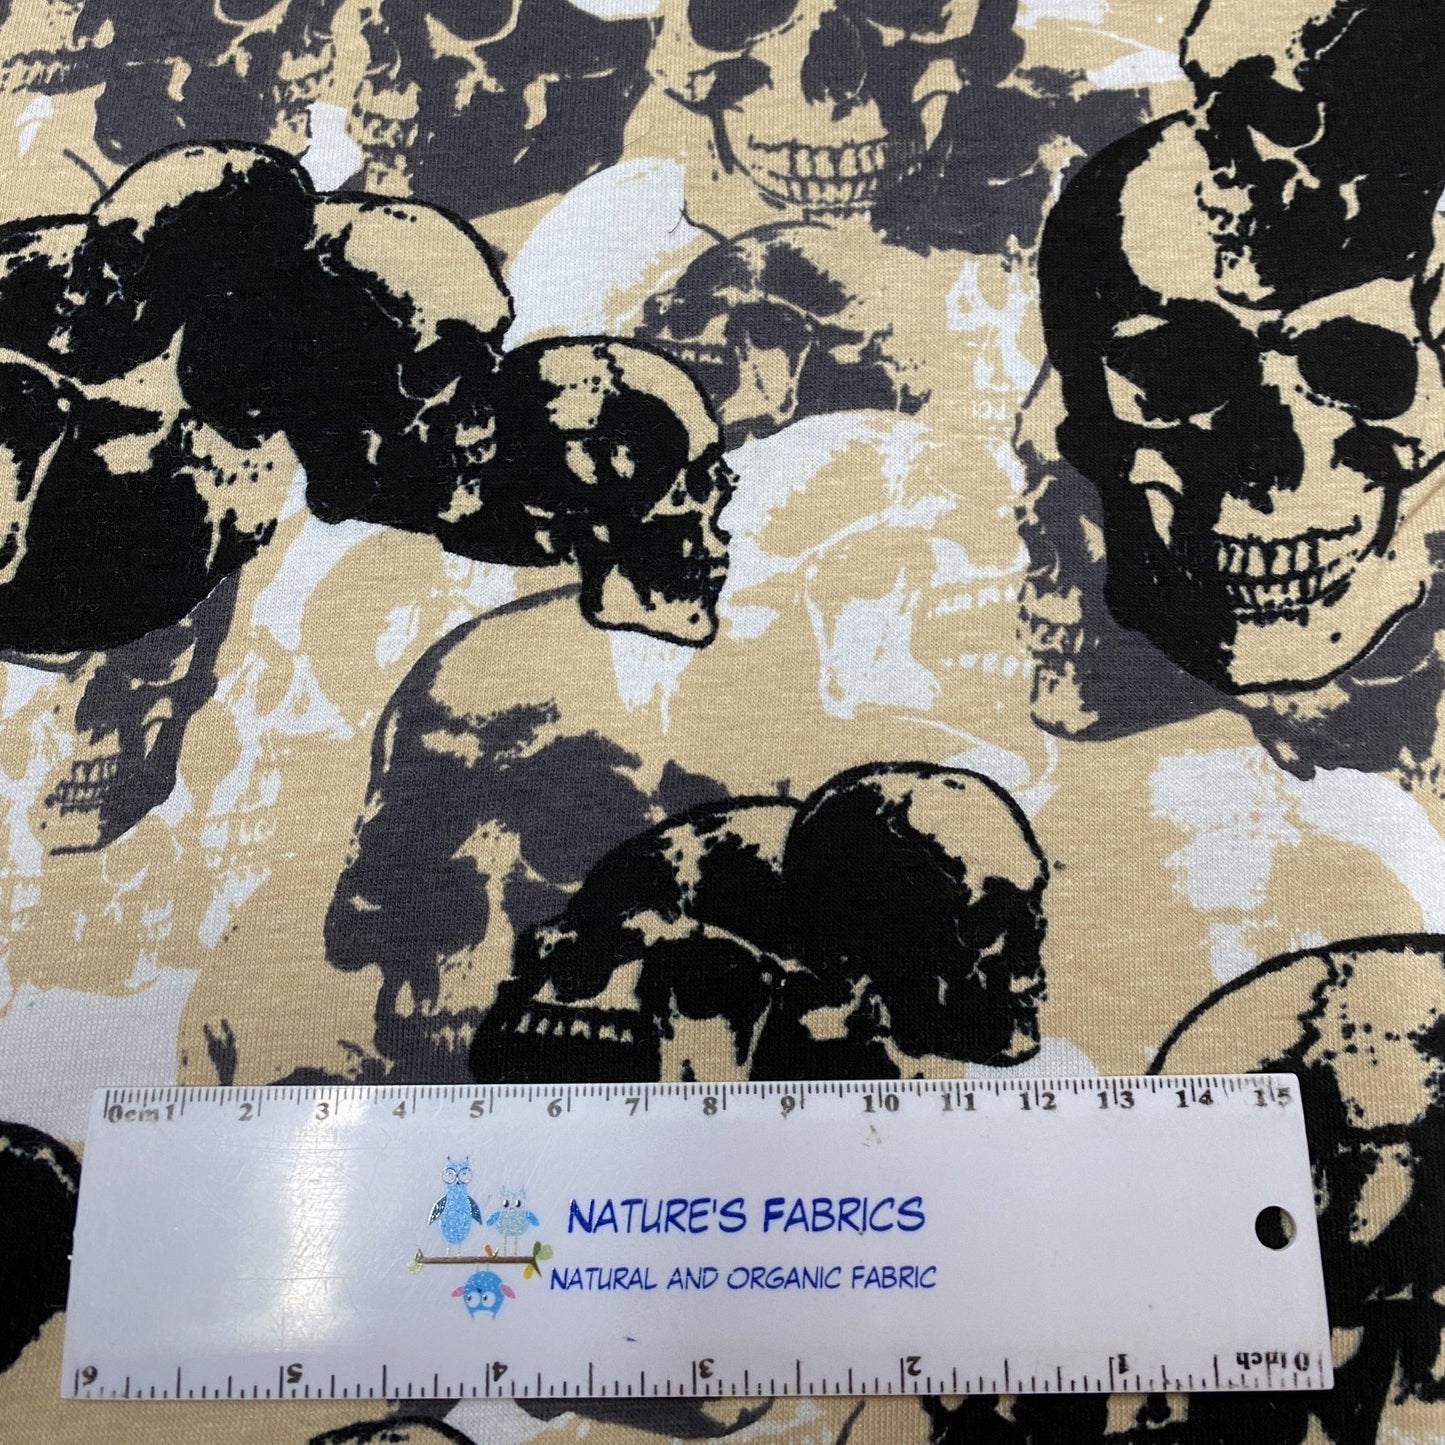 Tan and Black Skull Camouflage on Cotton/Spandex Jersey Fabric - Nature's Fabrics